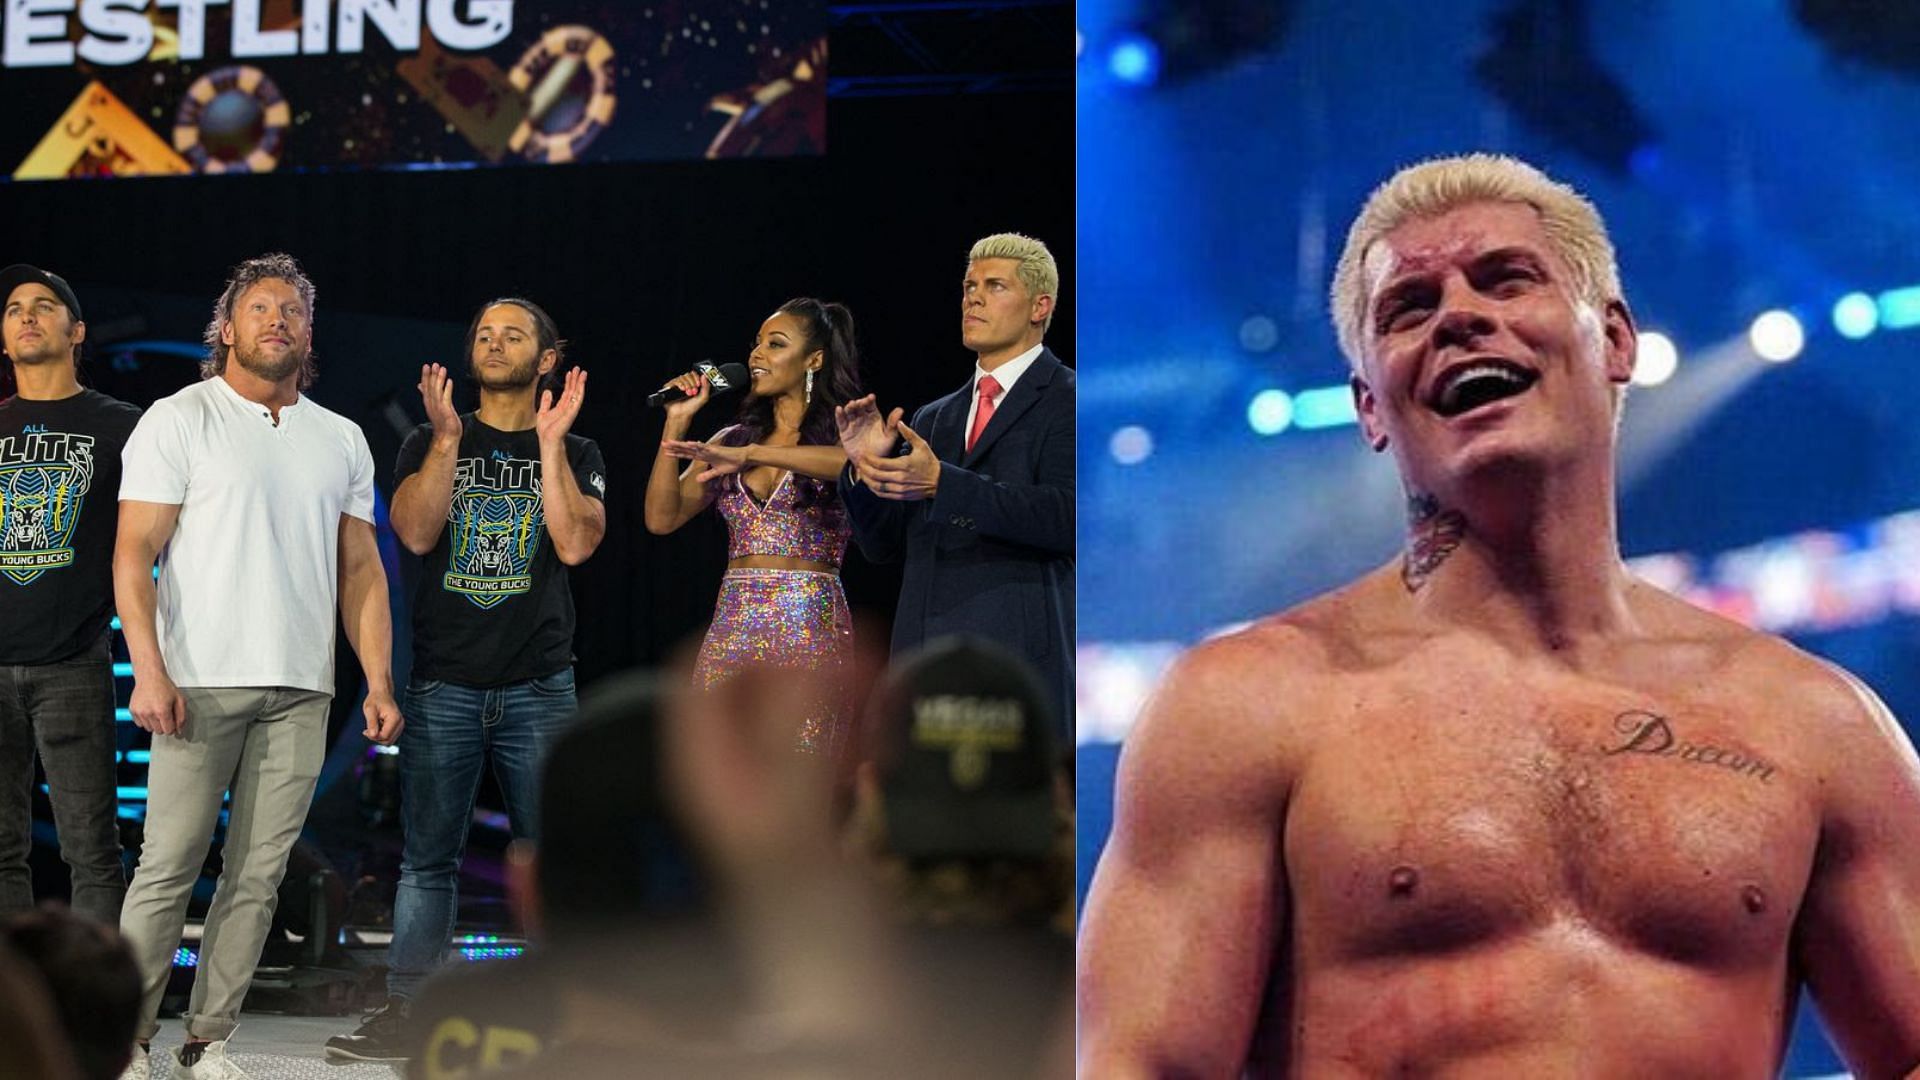 Cody Rhodes made his return to WWE at Wrestlemania 38